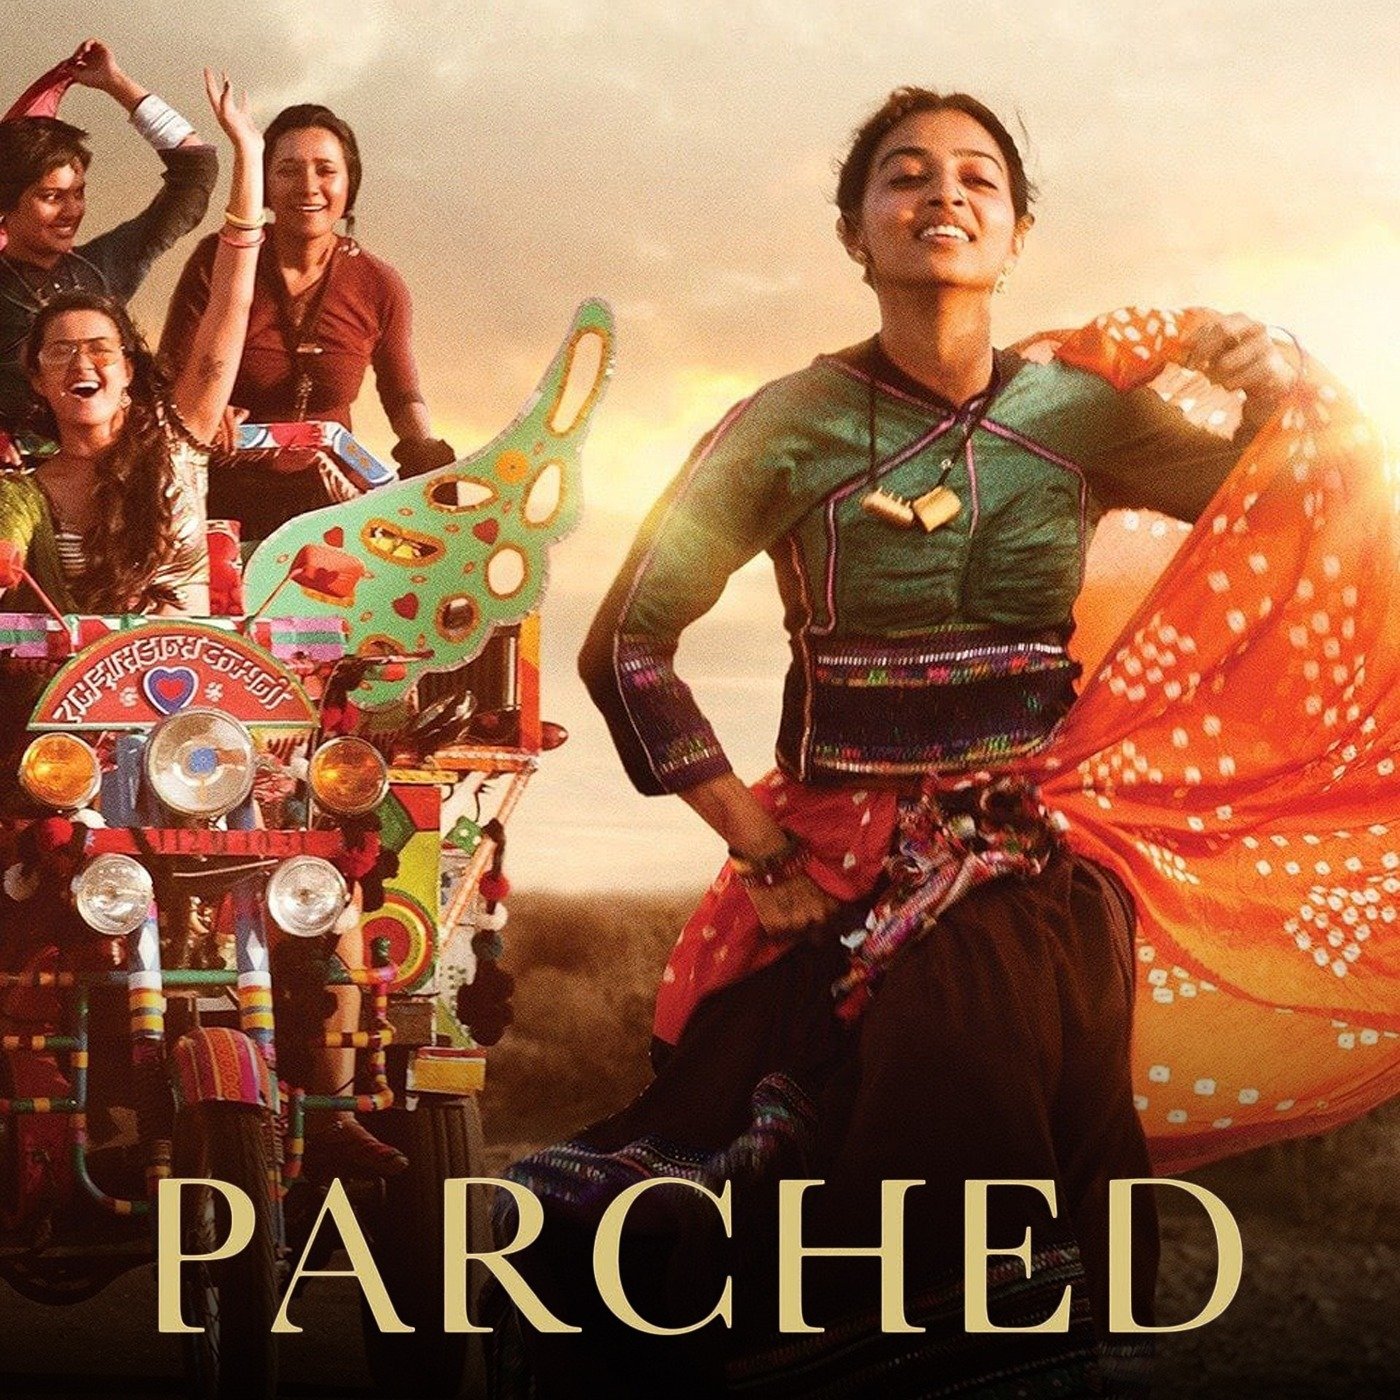 Parched Movie Online Free again gif